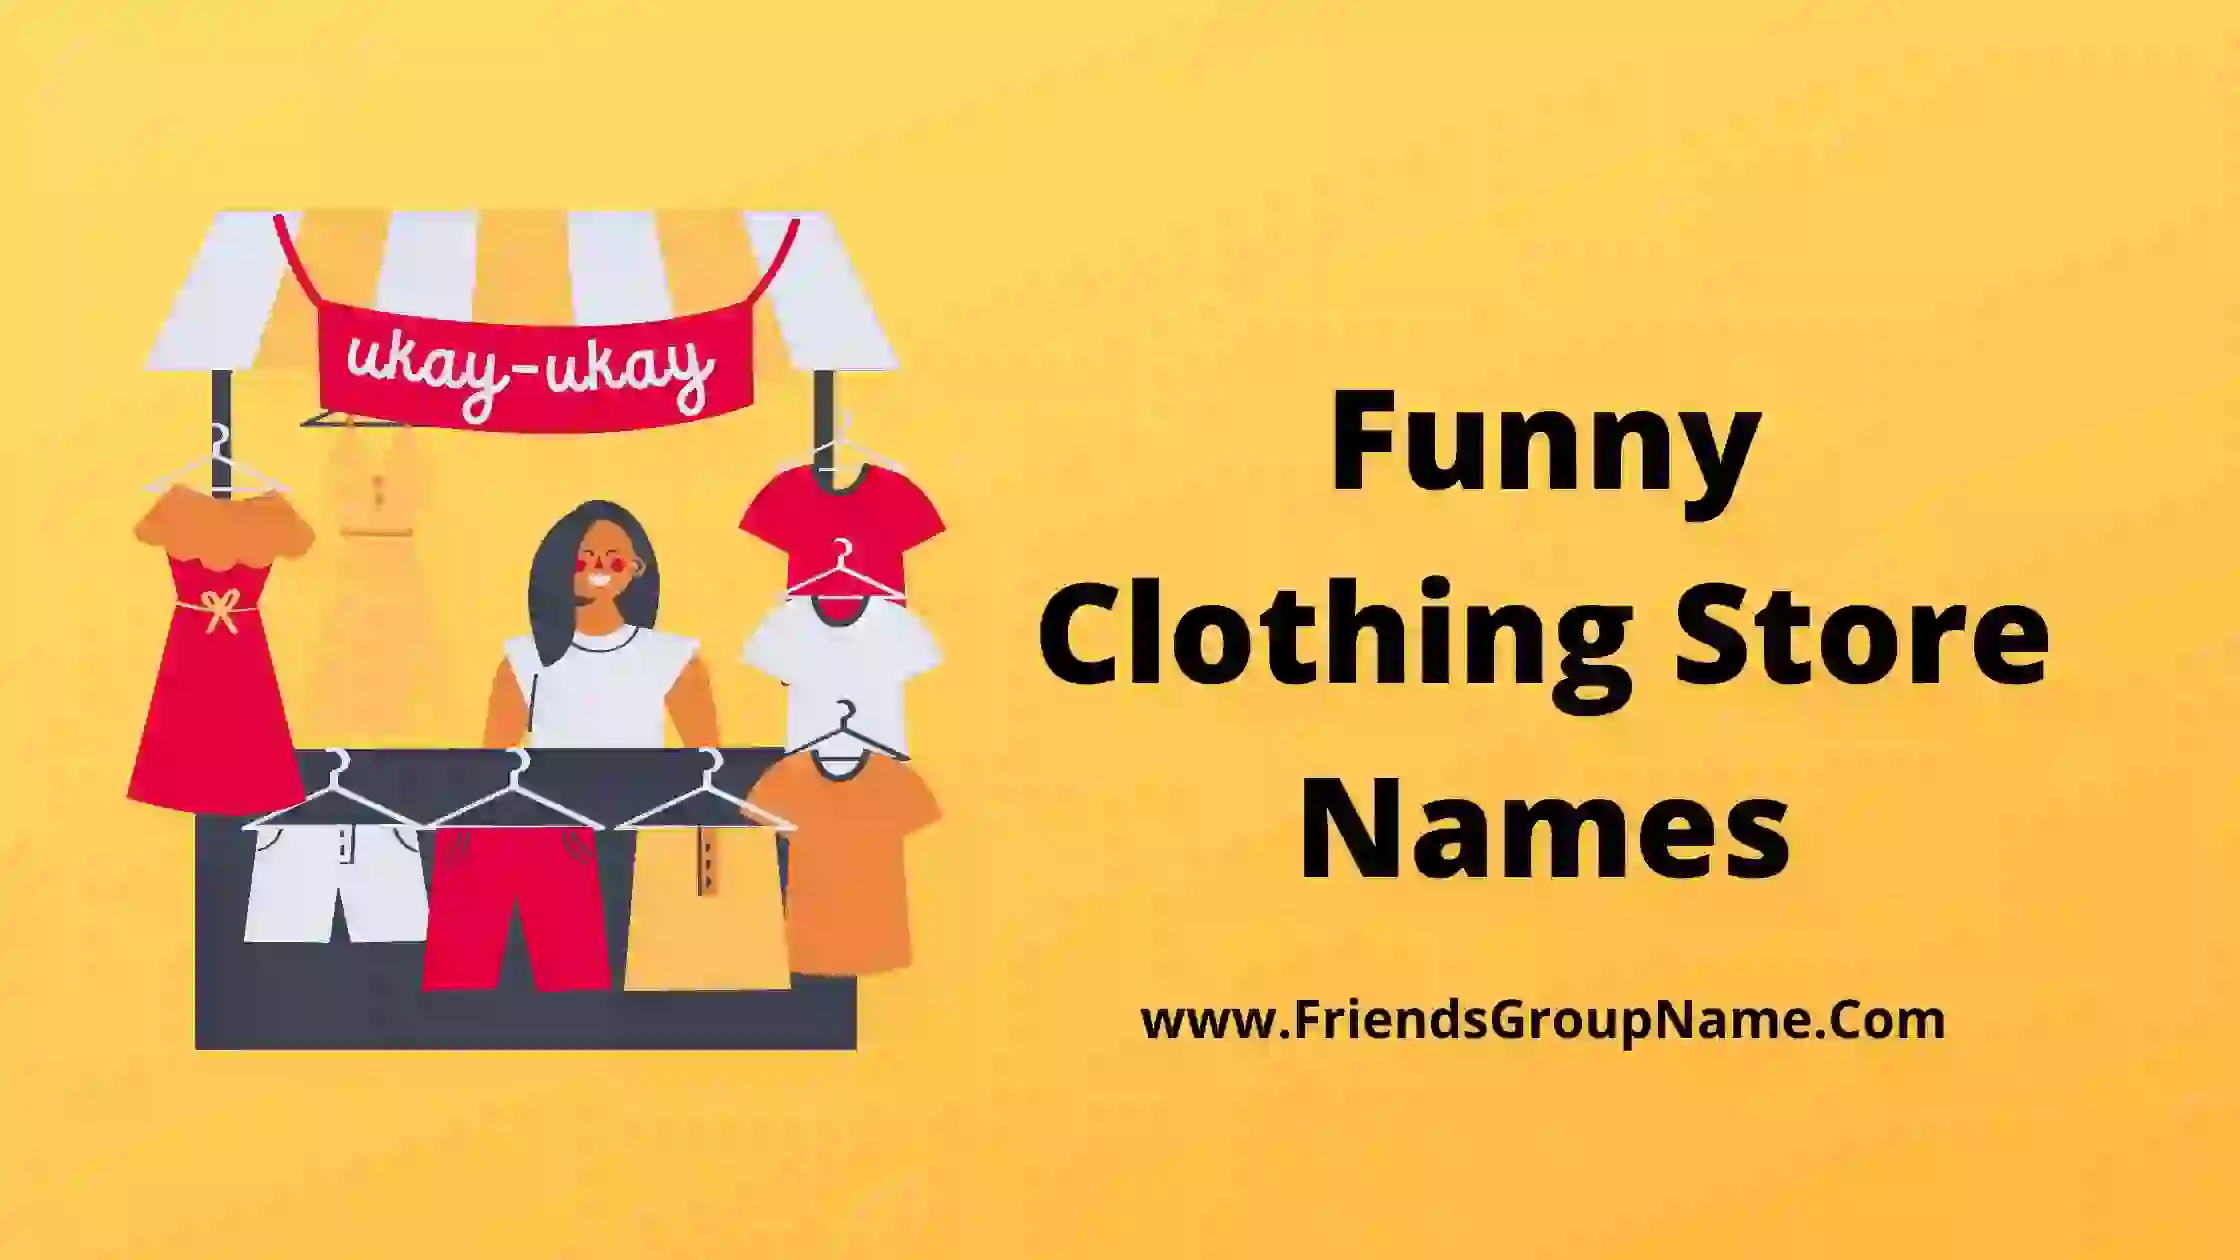 Funny Clothing Store Names